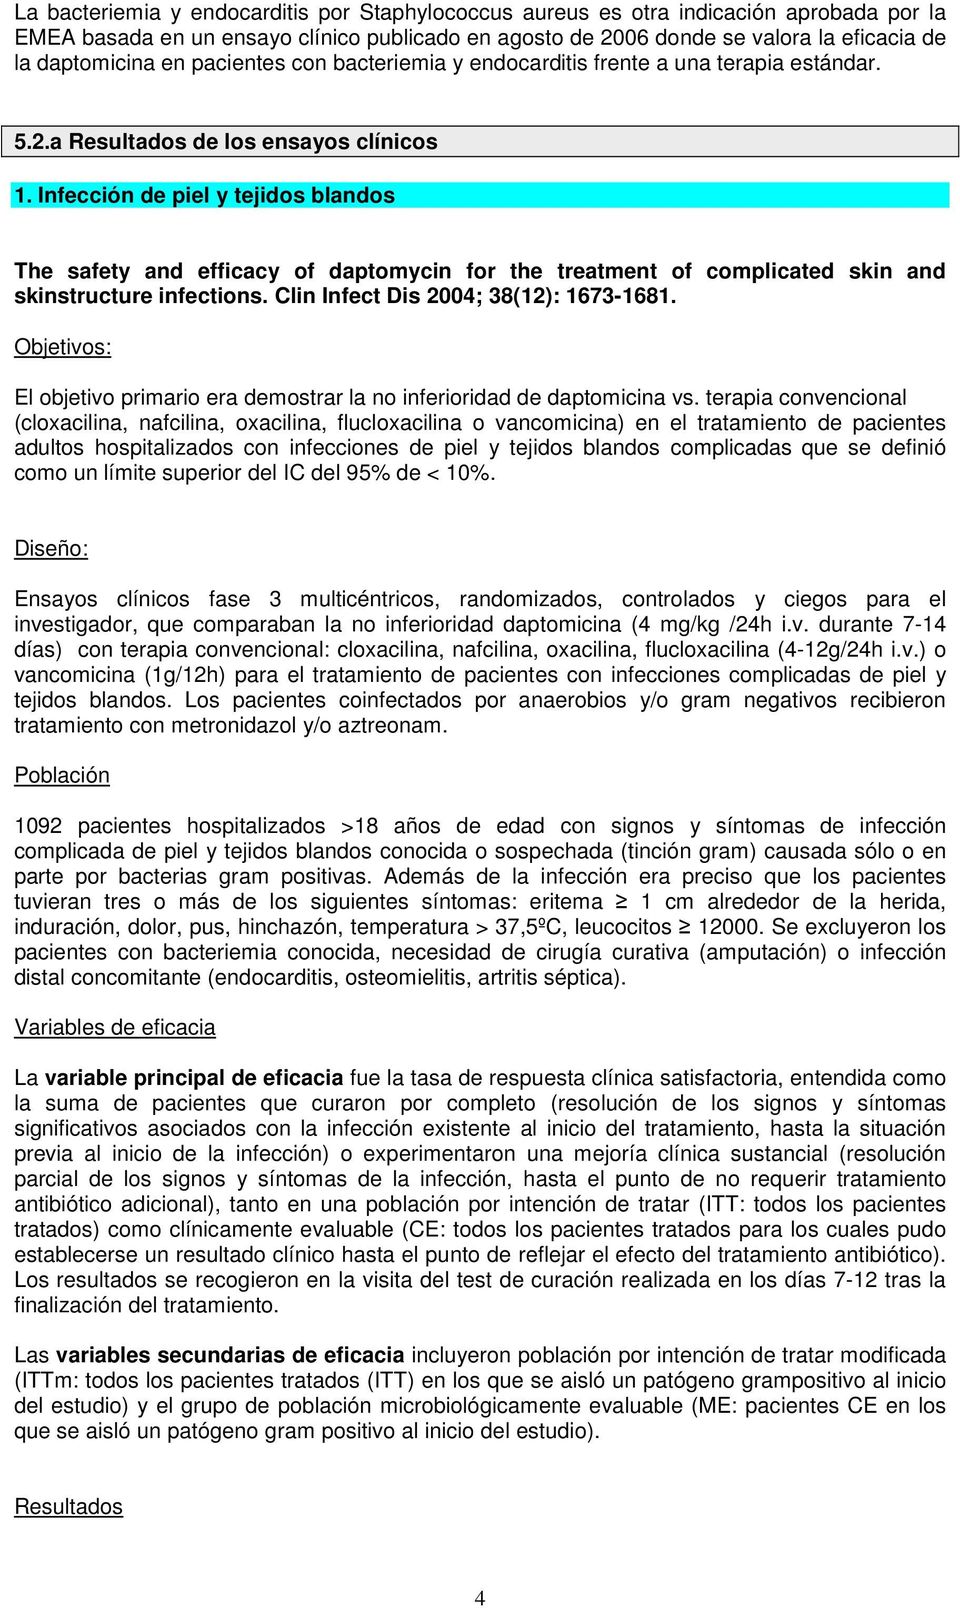 Infección de piel y tejidos blandos The safety and efficacy of daptomycin for the treatment of complicated skin and skinstructure infections. Clin Infect Dis 2004; 38(12): 1673-1681.